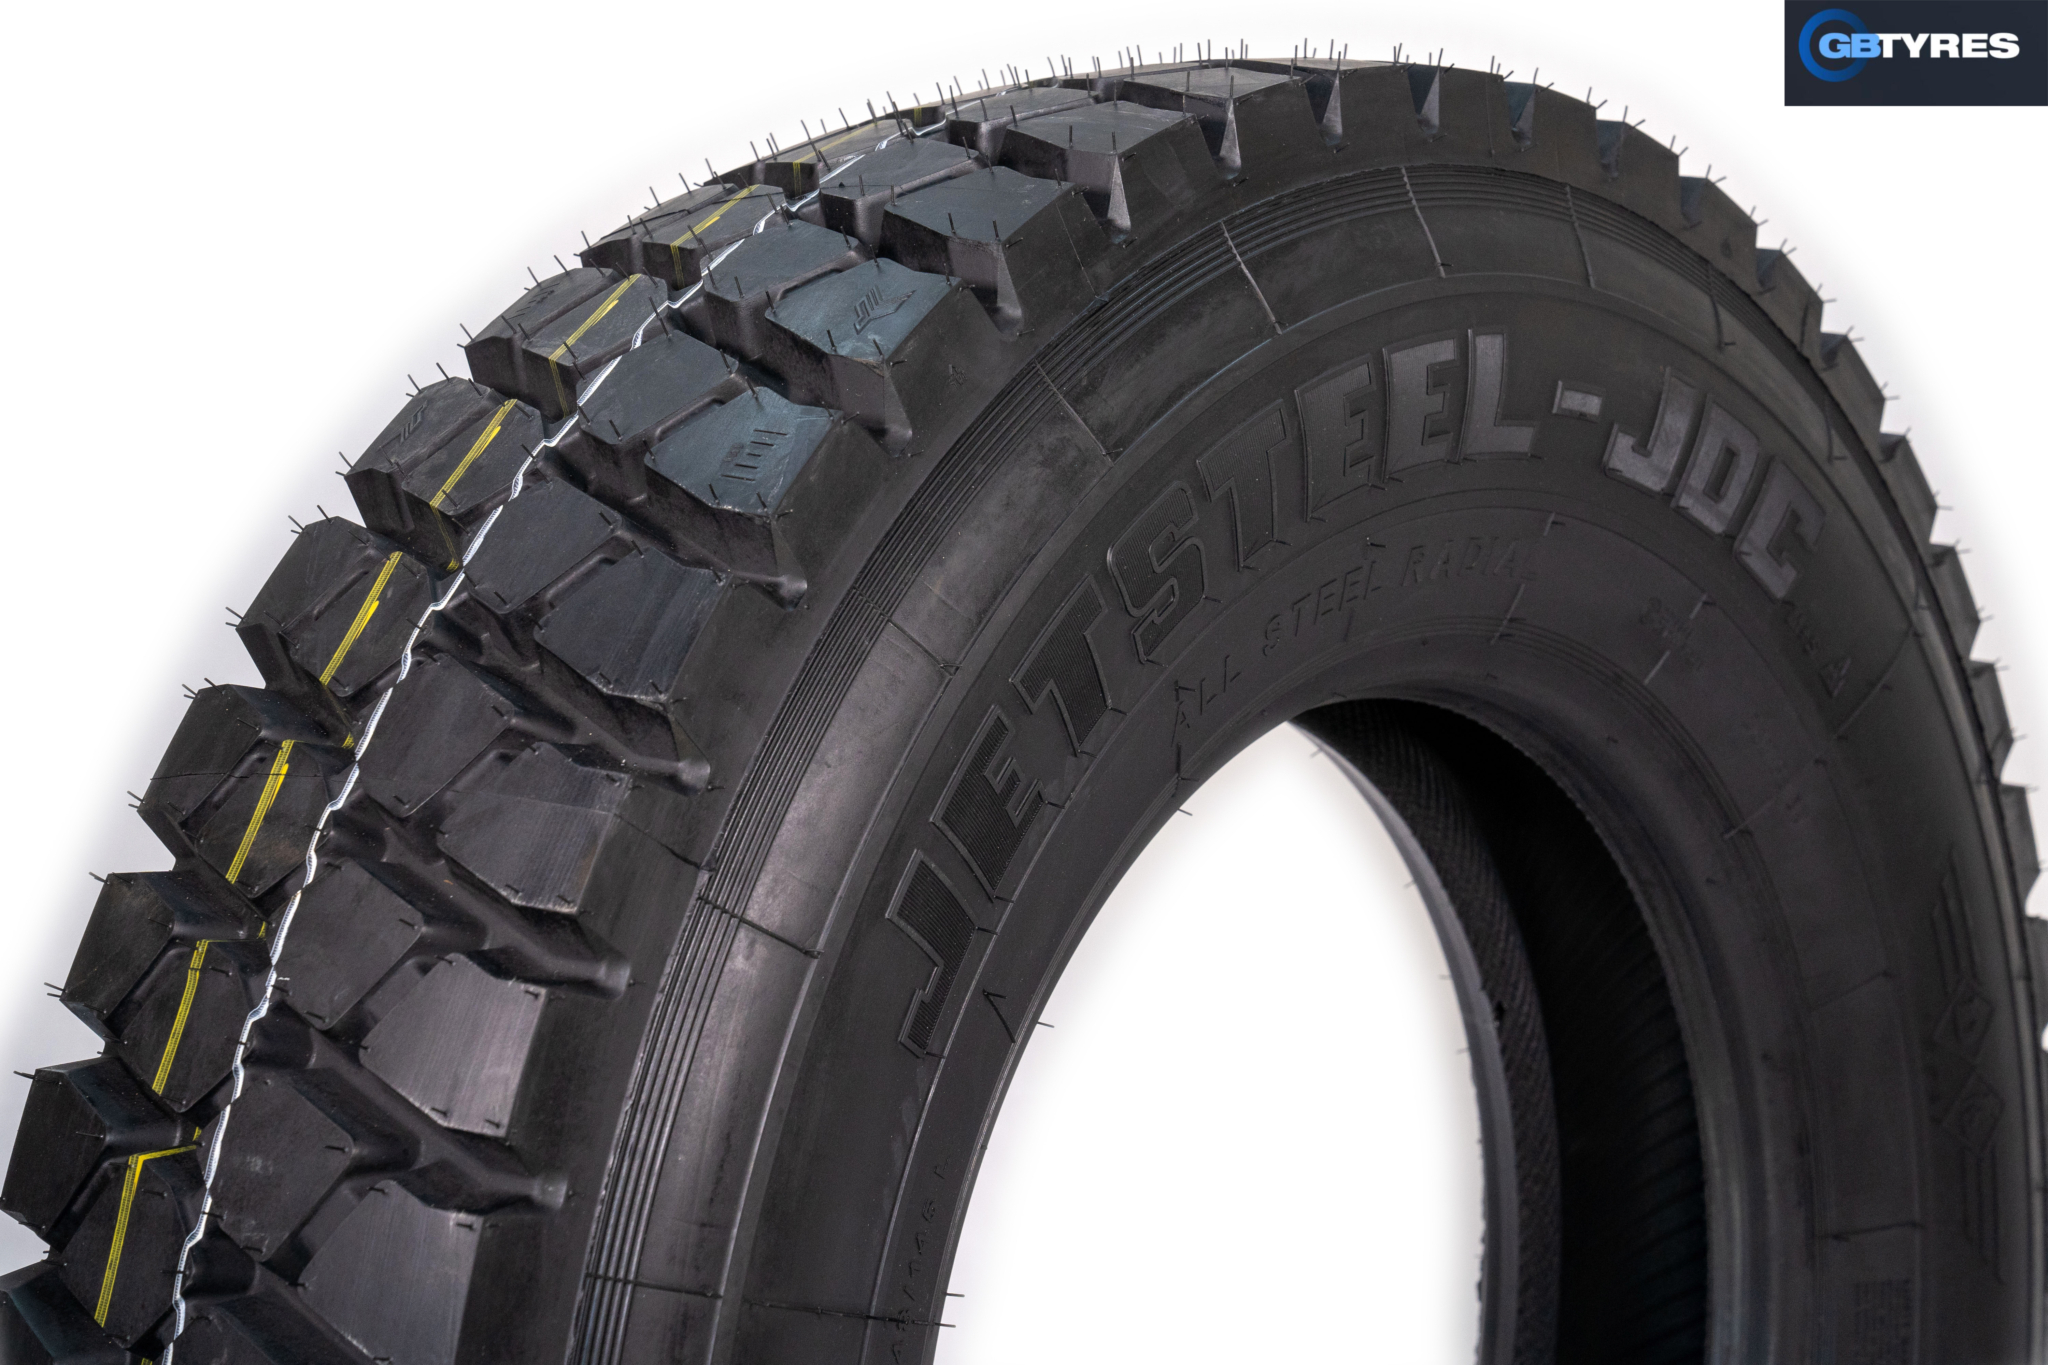 gb-tyres-introduces-6-year-warranty-on-jk-tyre-commercial-vehicle-tyres